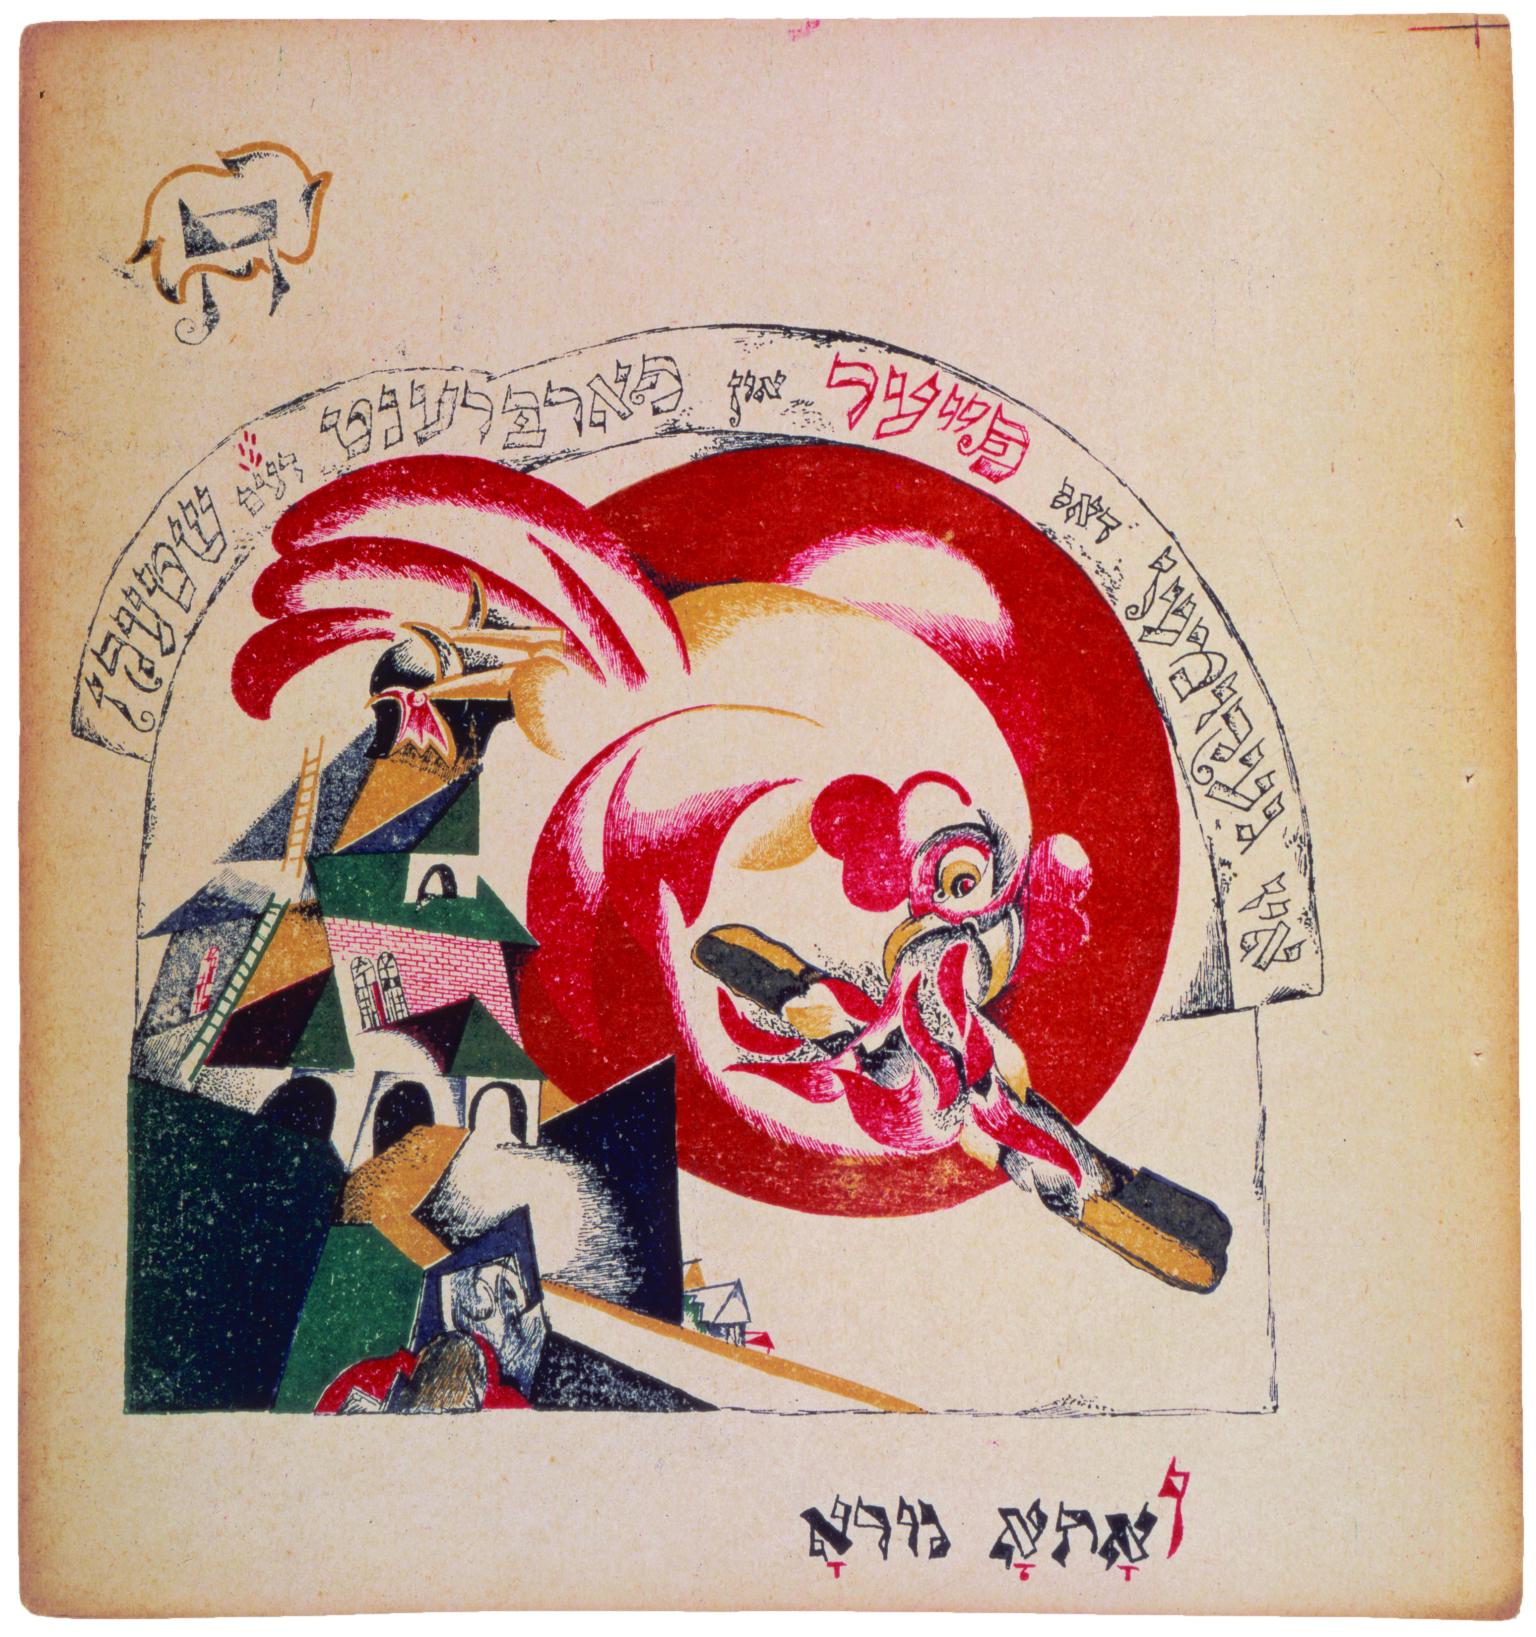 Lithograph on paper of building on the left and a large bird grabbing a stick of fire with beak, with Yiddish text along top of image and Aramaic on bottom.